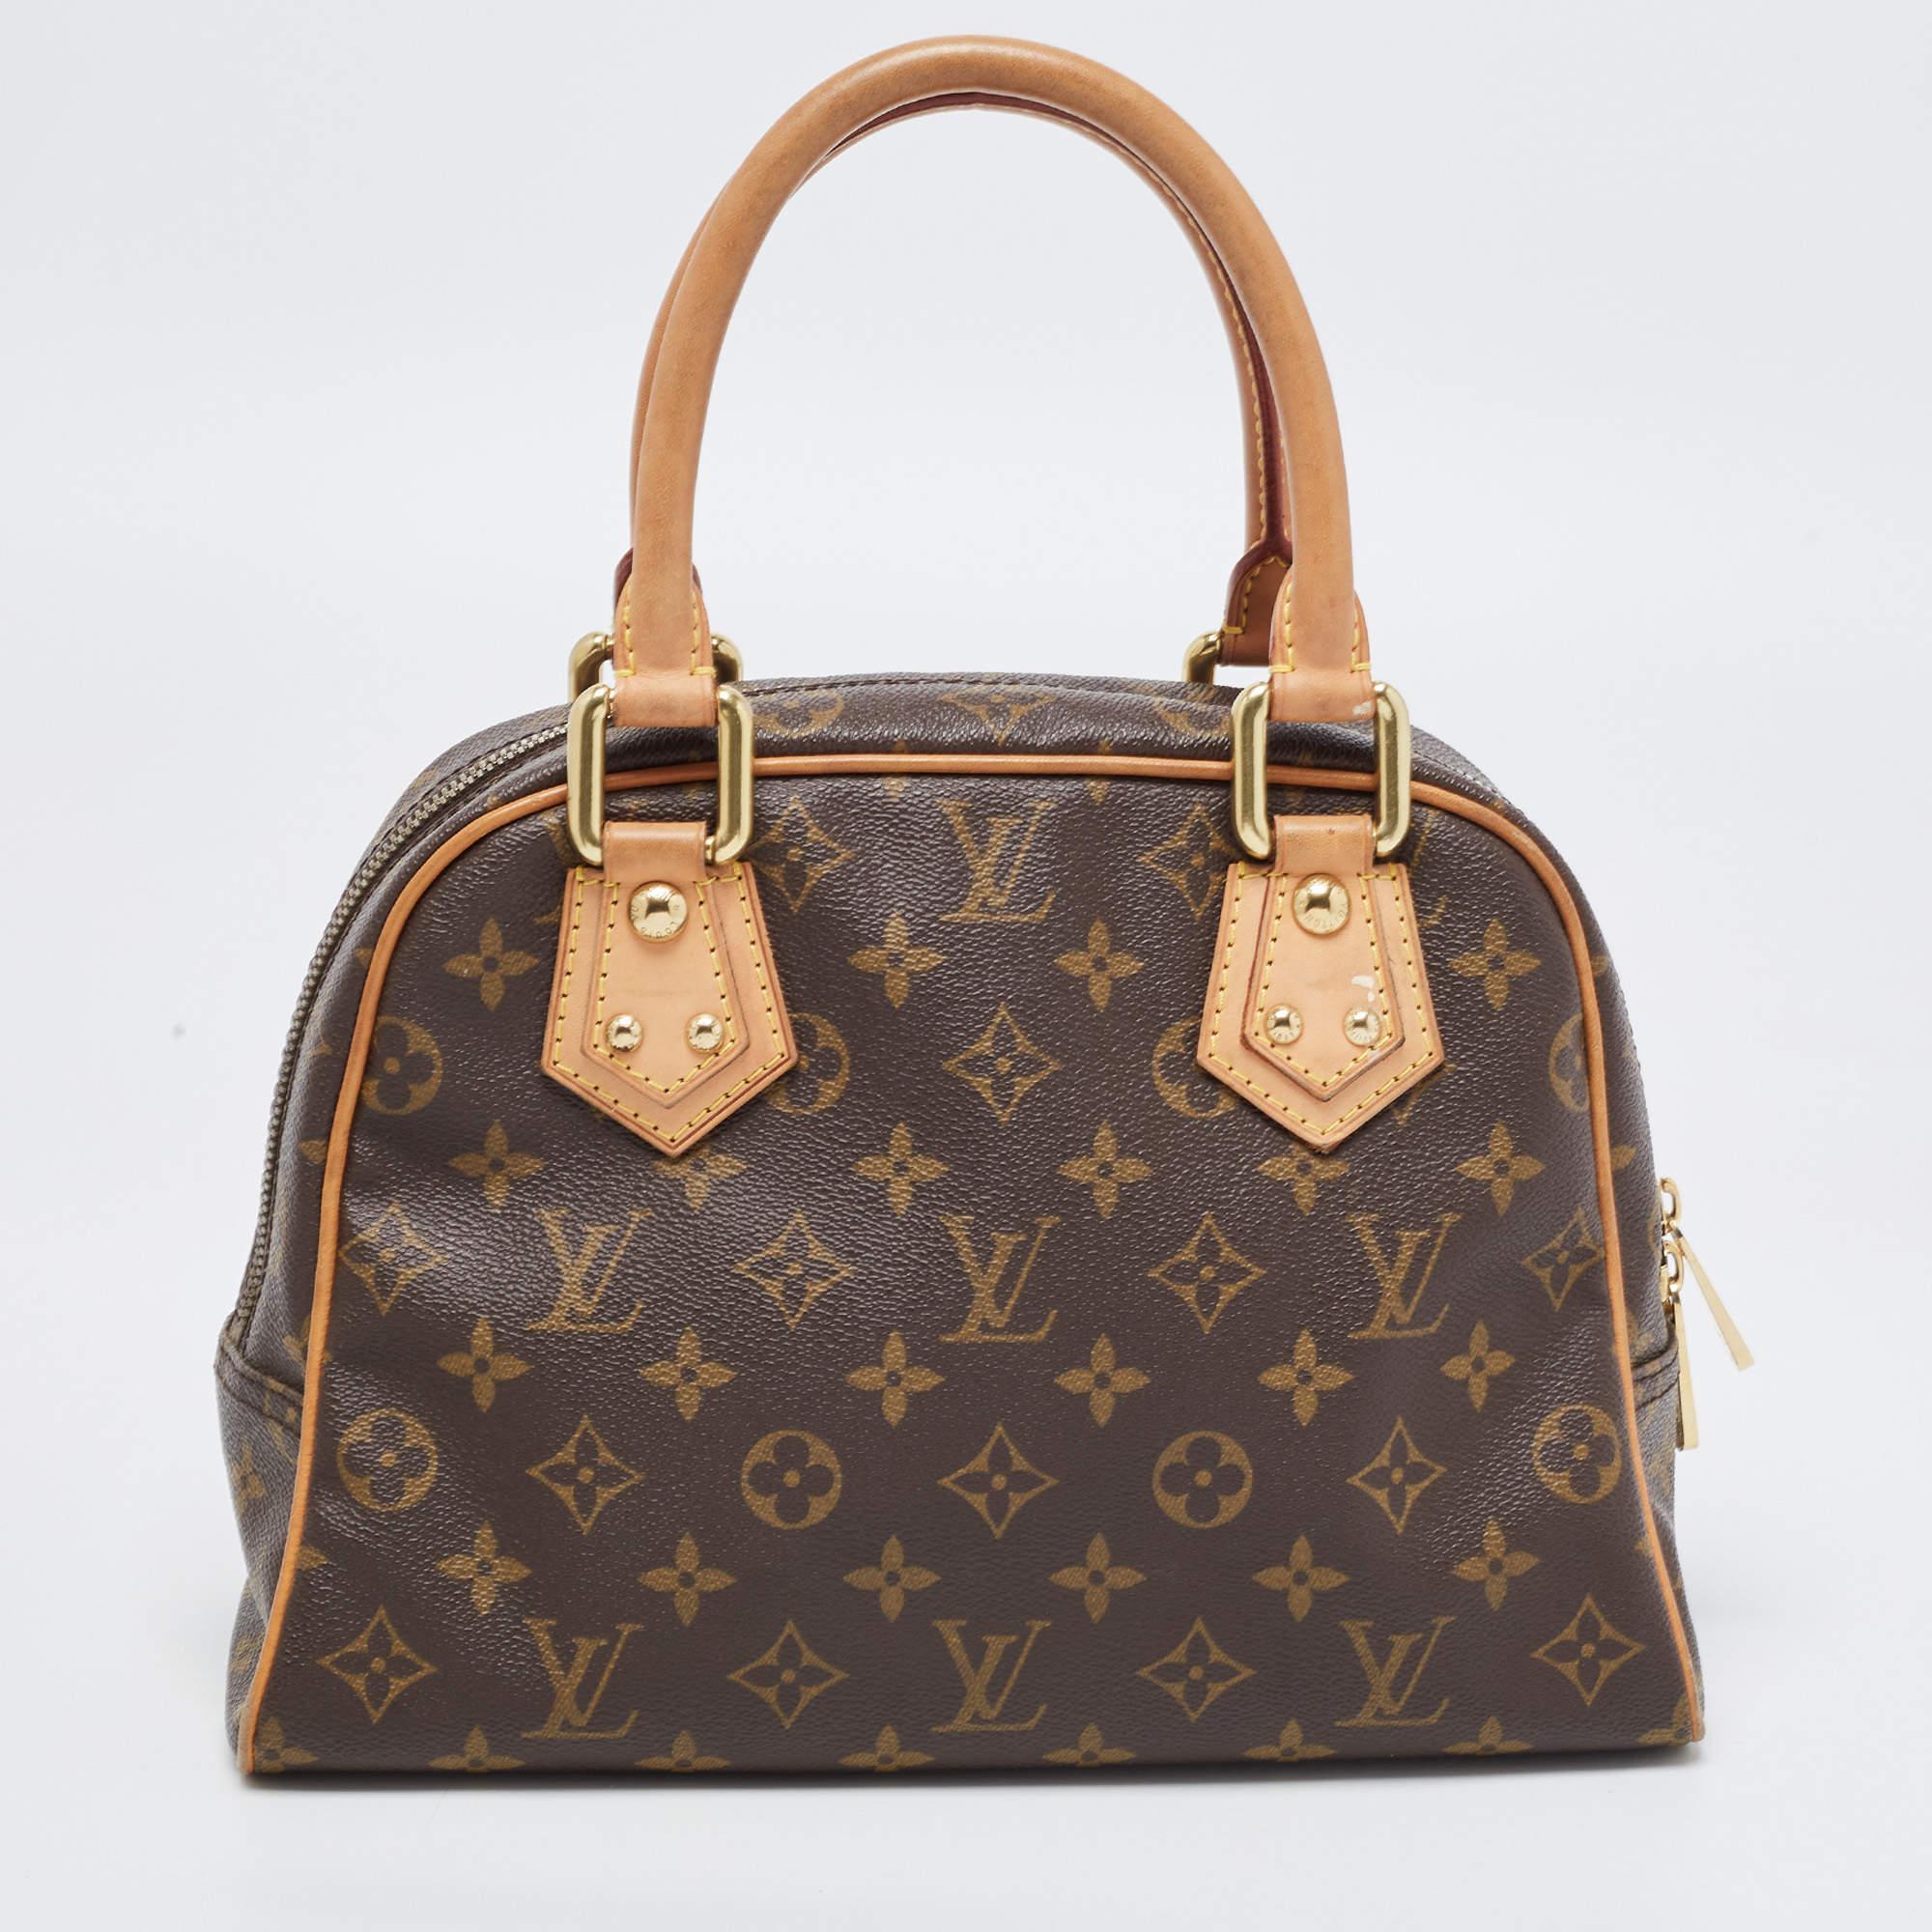 This Louis Vuitton Manhattan PM tote promises to take you through the day with ease, whether you're at work or out and about in the city. From its design to its structure, the Monogram canvas & leather bag promises charm and durability. It has top